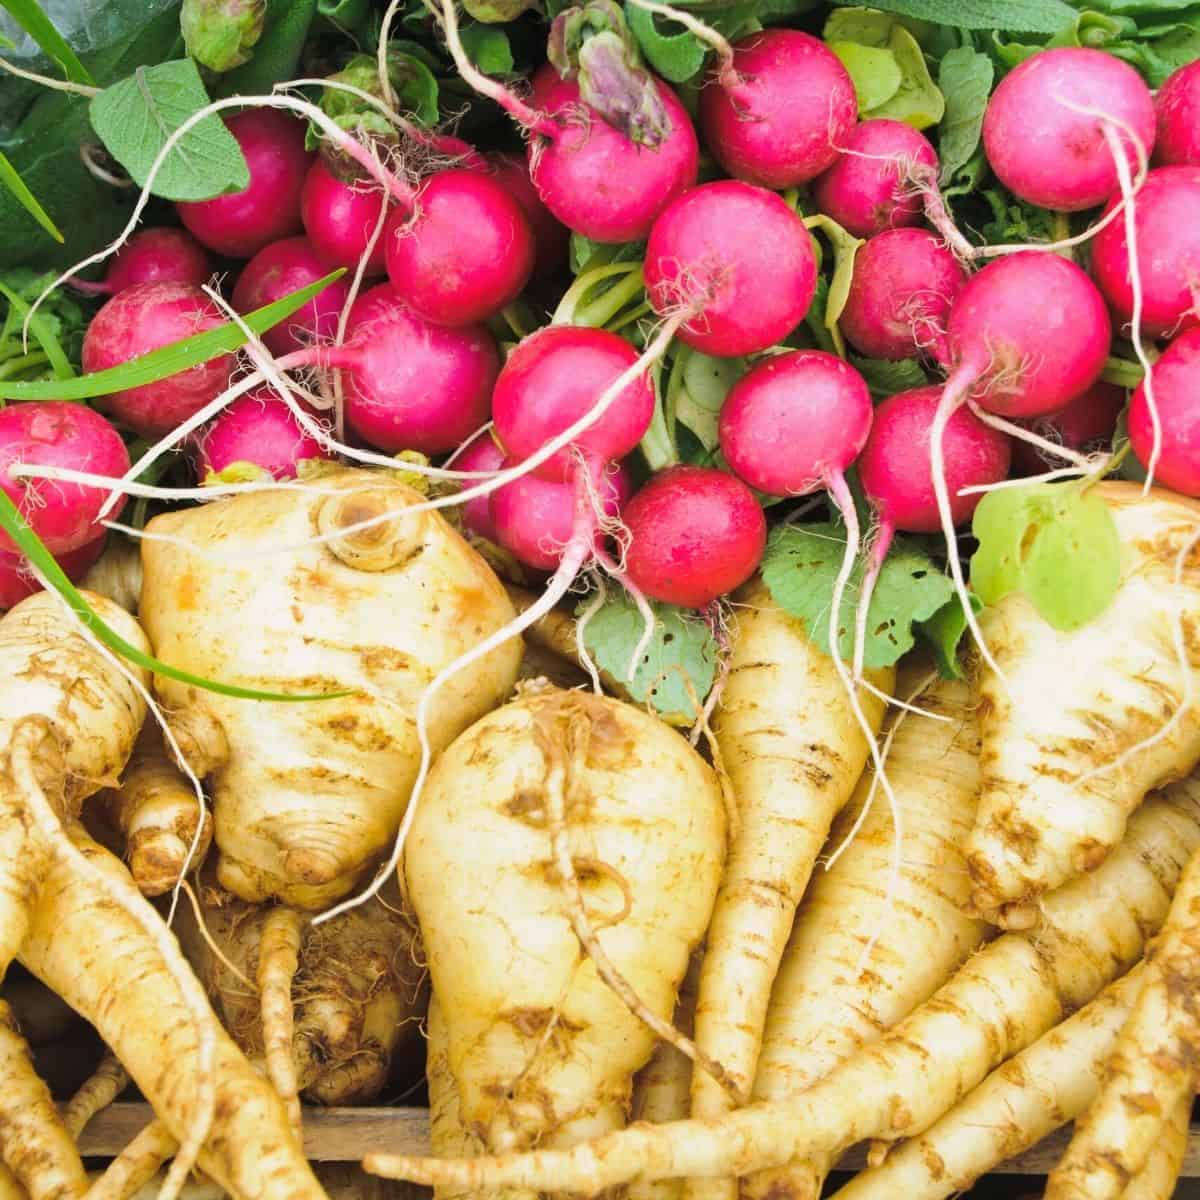 radishes and parsnips - Are Parsnips Keto? How to eat them on Keto.